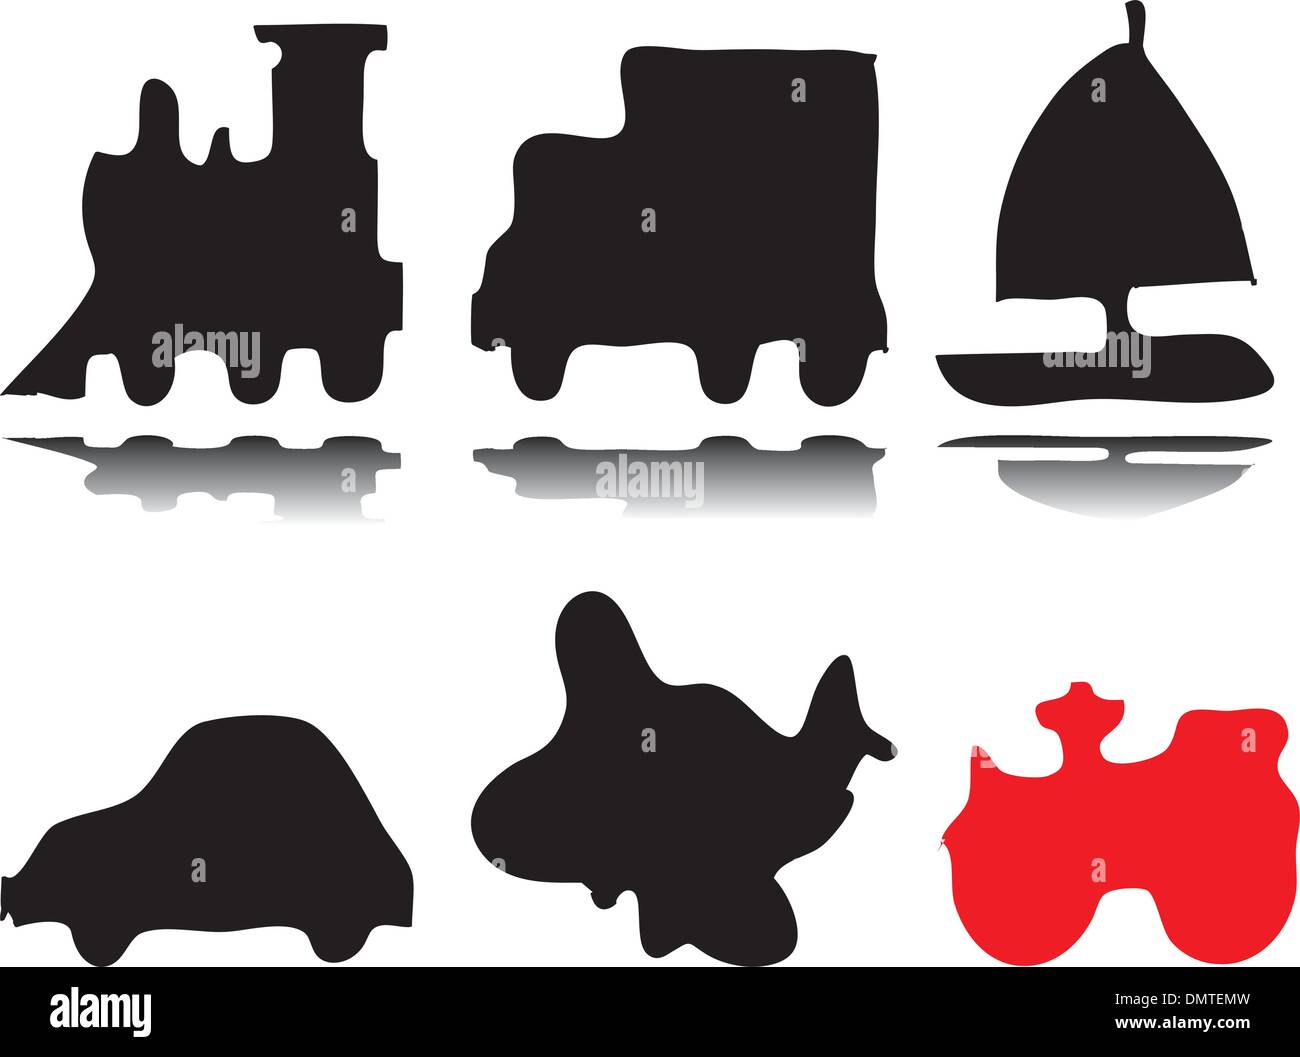 Silhouettes of vehicles Stock Vector